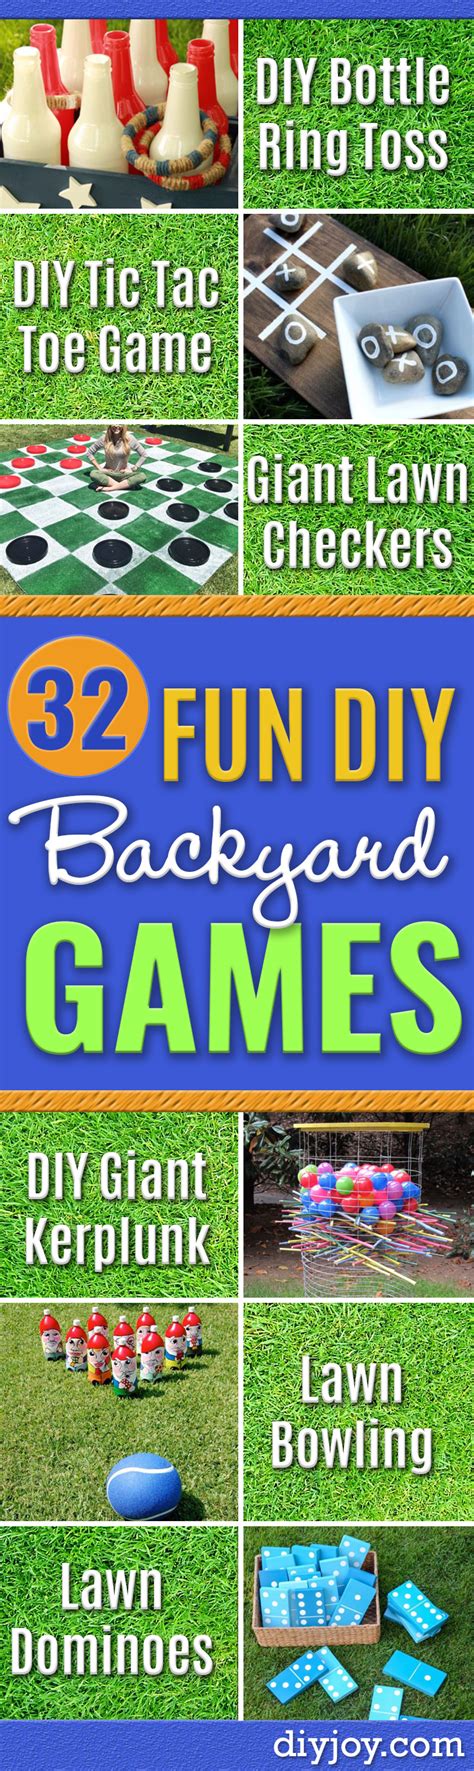 If you do and entertaining family and friends, you should start making some of these fun yard games now. 32 DIY Backyard Games That Will Make Summer Even More Awesome!